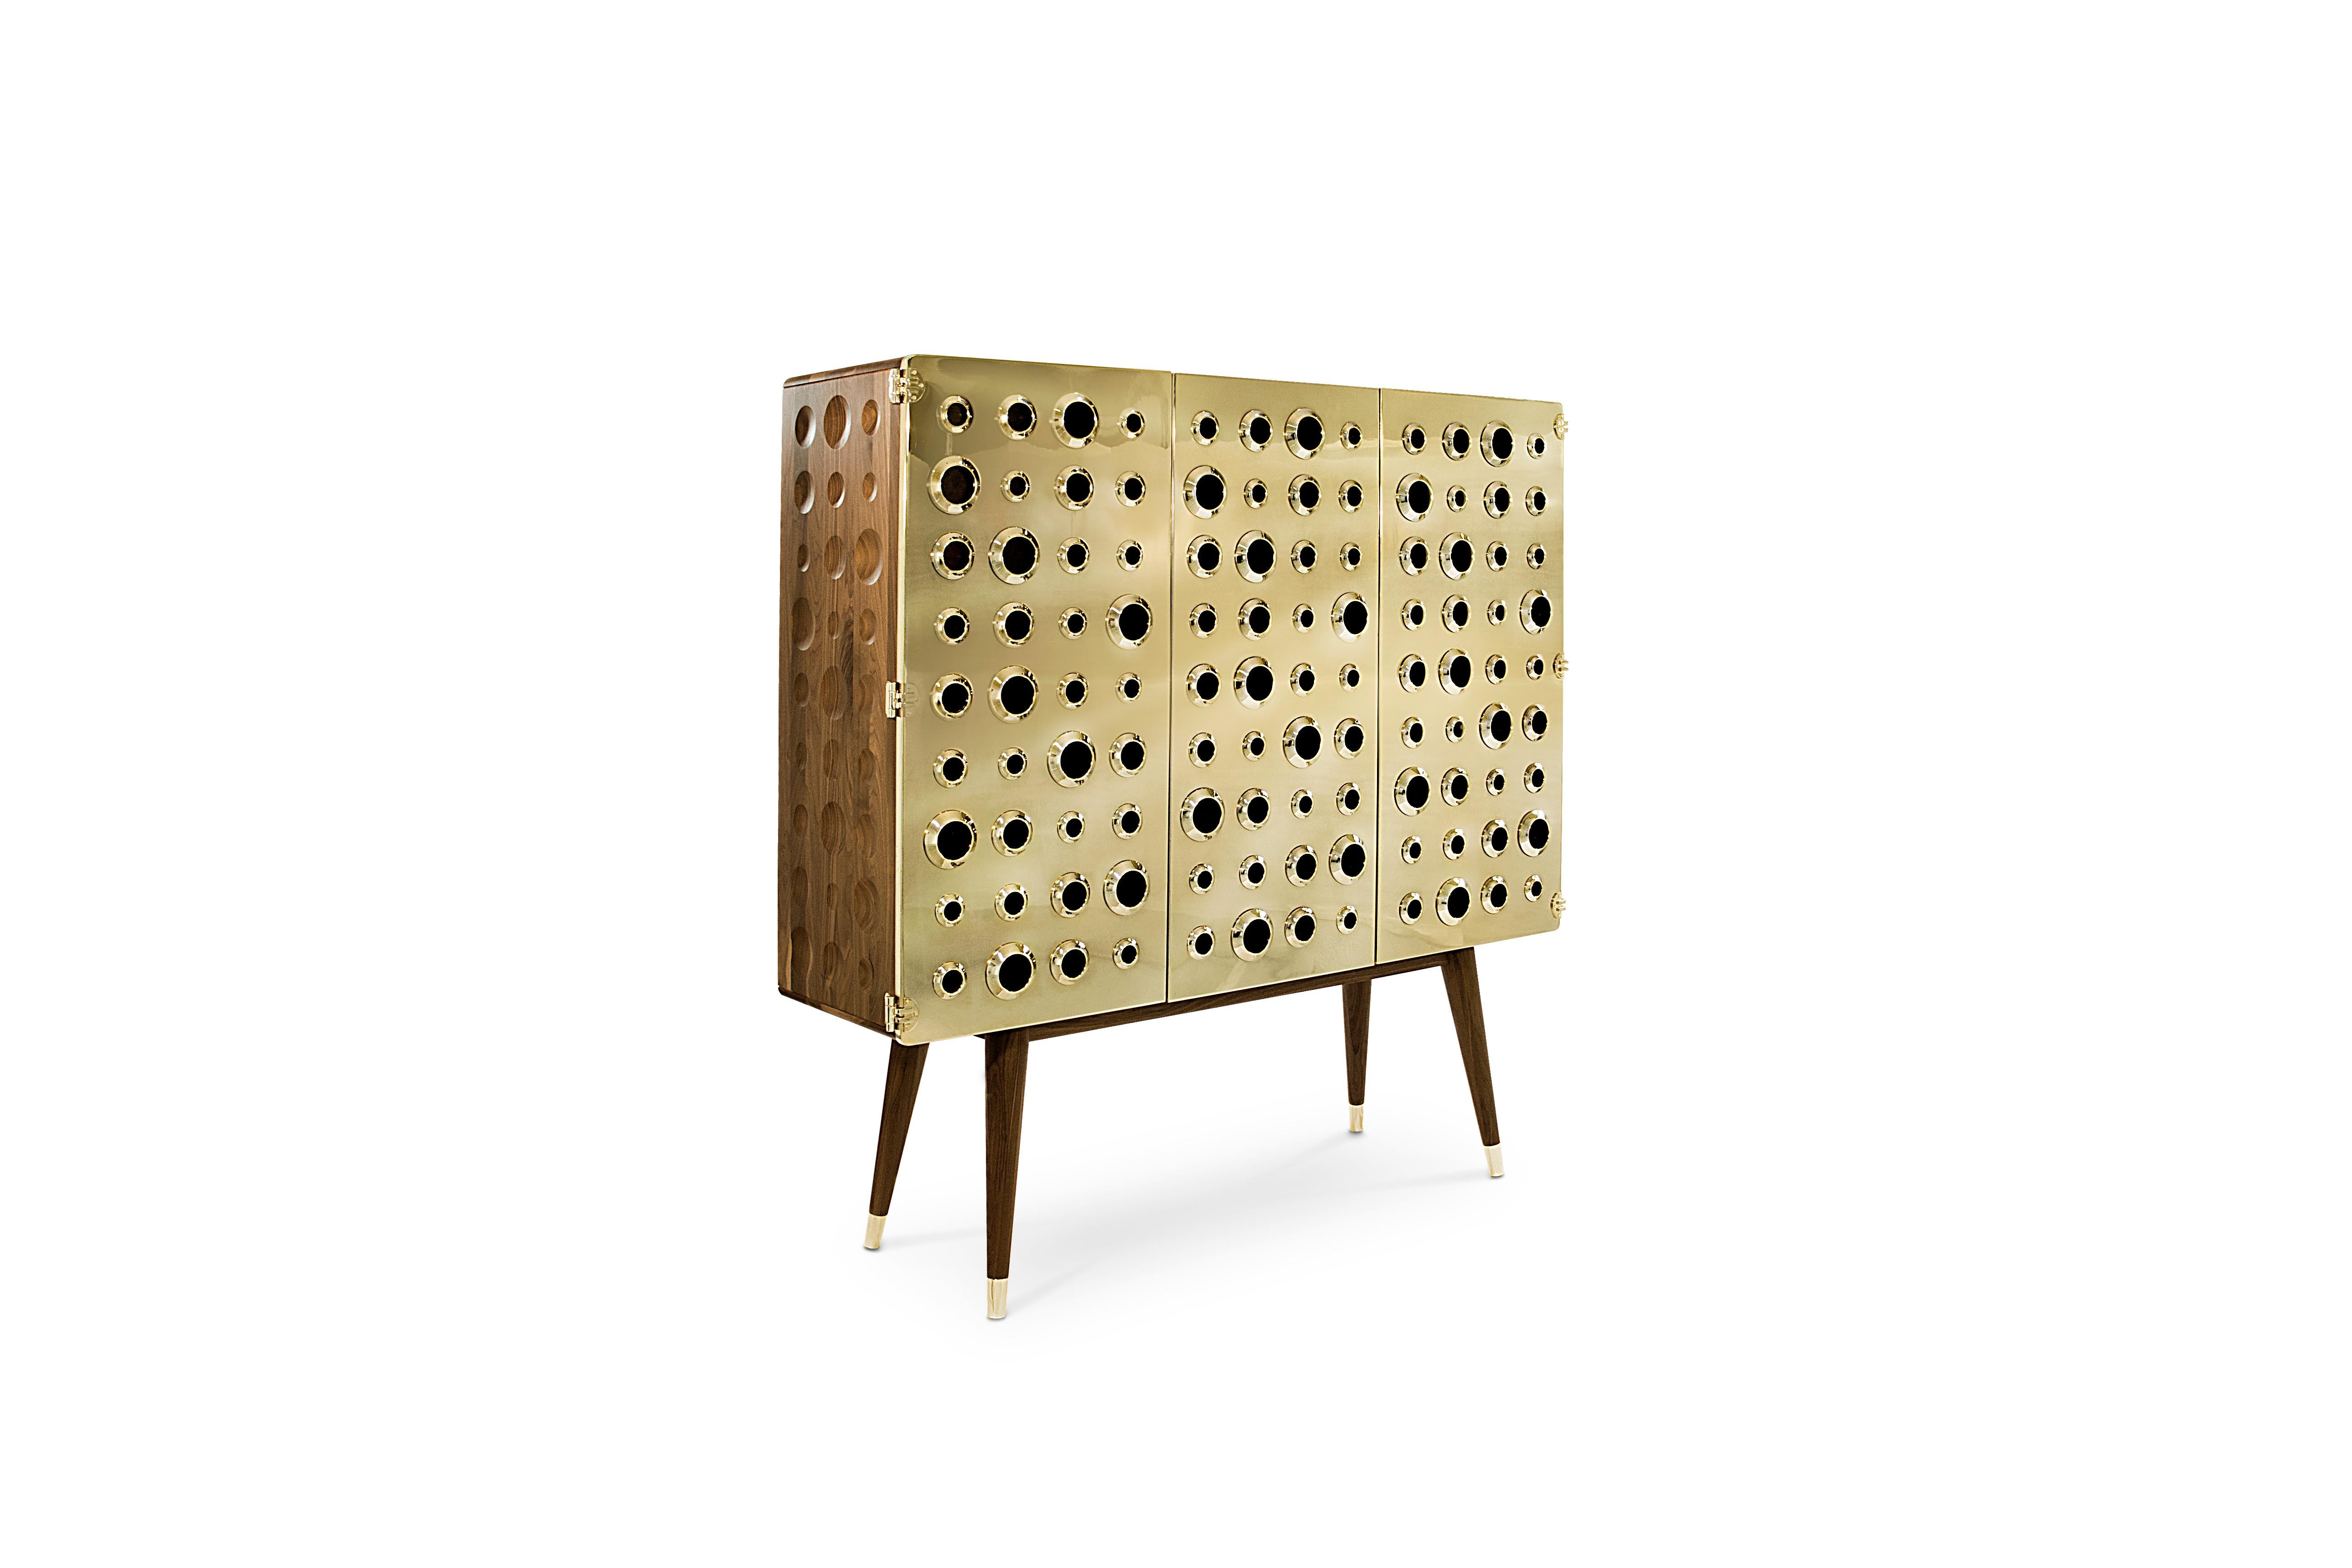 If you are a fan of the James Bond world, you will certainly be dazzled with this golden eye‐catching piece. We named this cabinet 